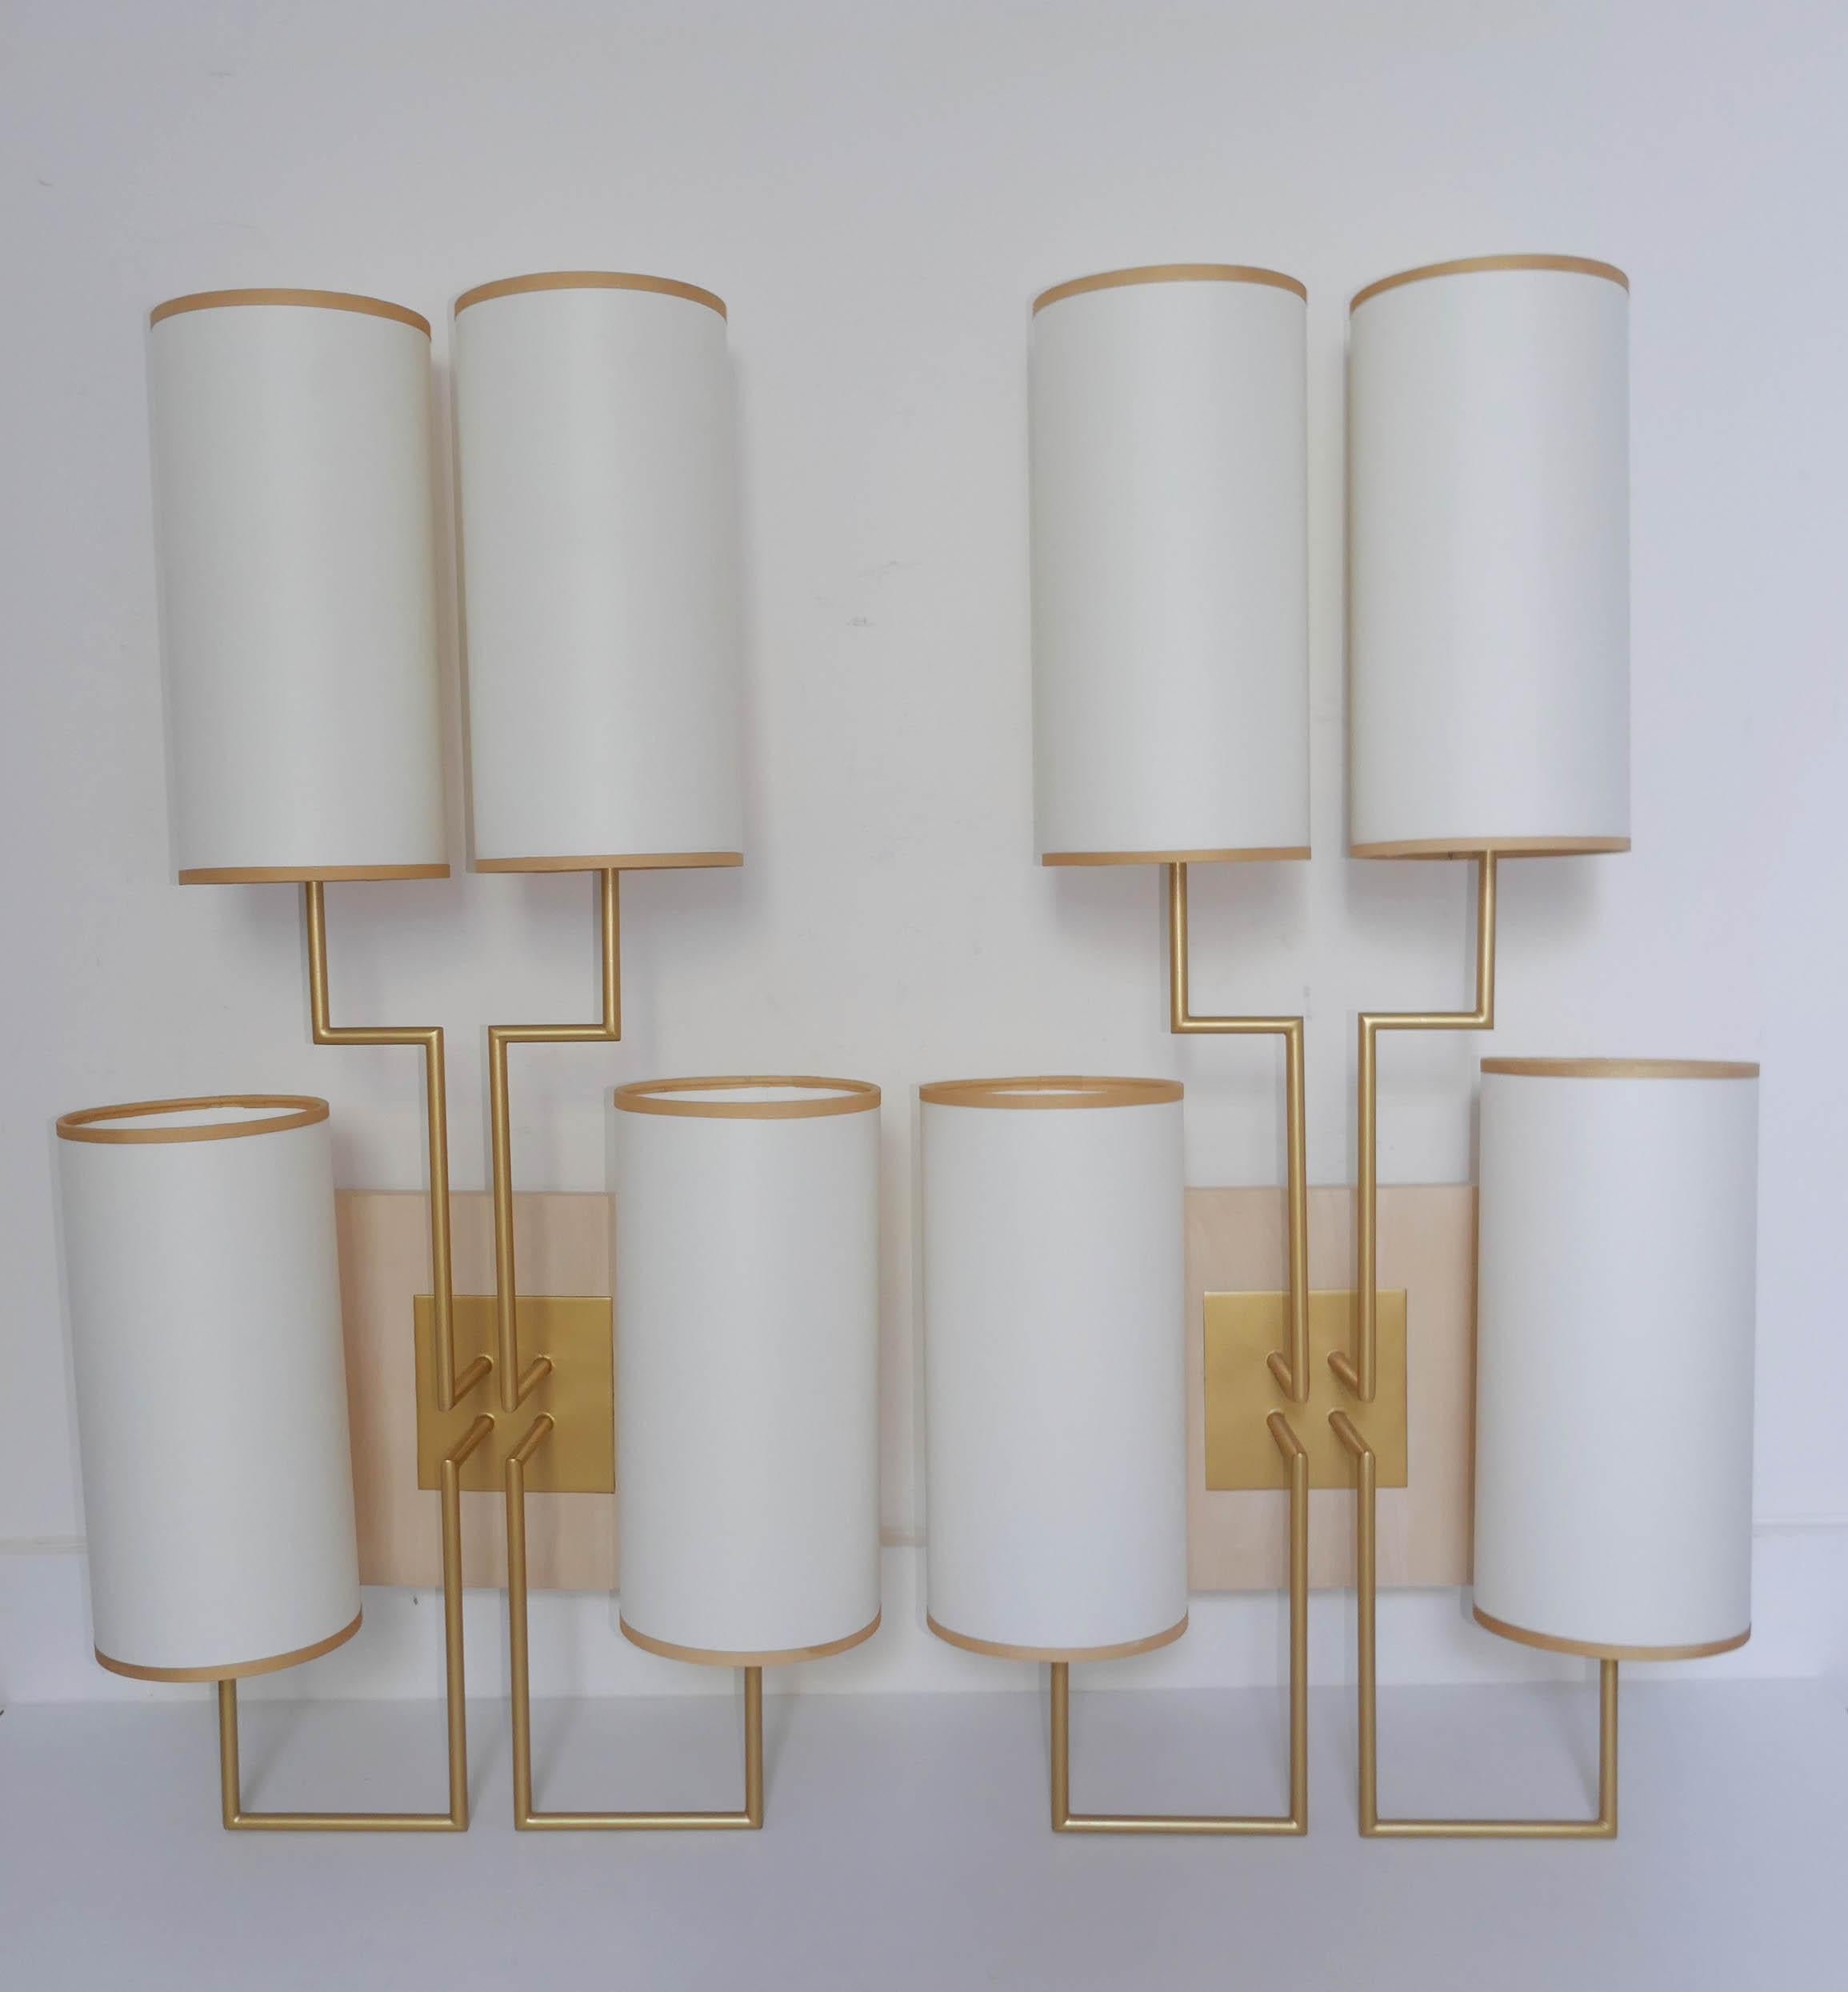 Pair of wall lamp sconce in gold patina and white lamp shades, wooden baze in chestnut. Four lampshade in white fabric and golden braid.
 Information about the covid 19.
 At this point, the workshop has anticipated the crises and has all the